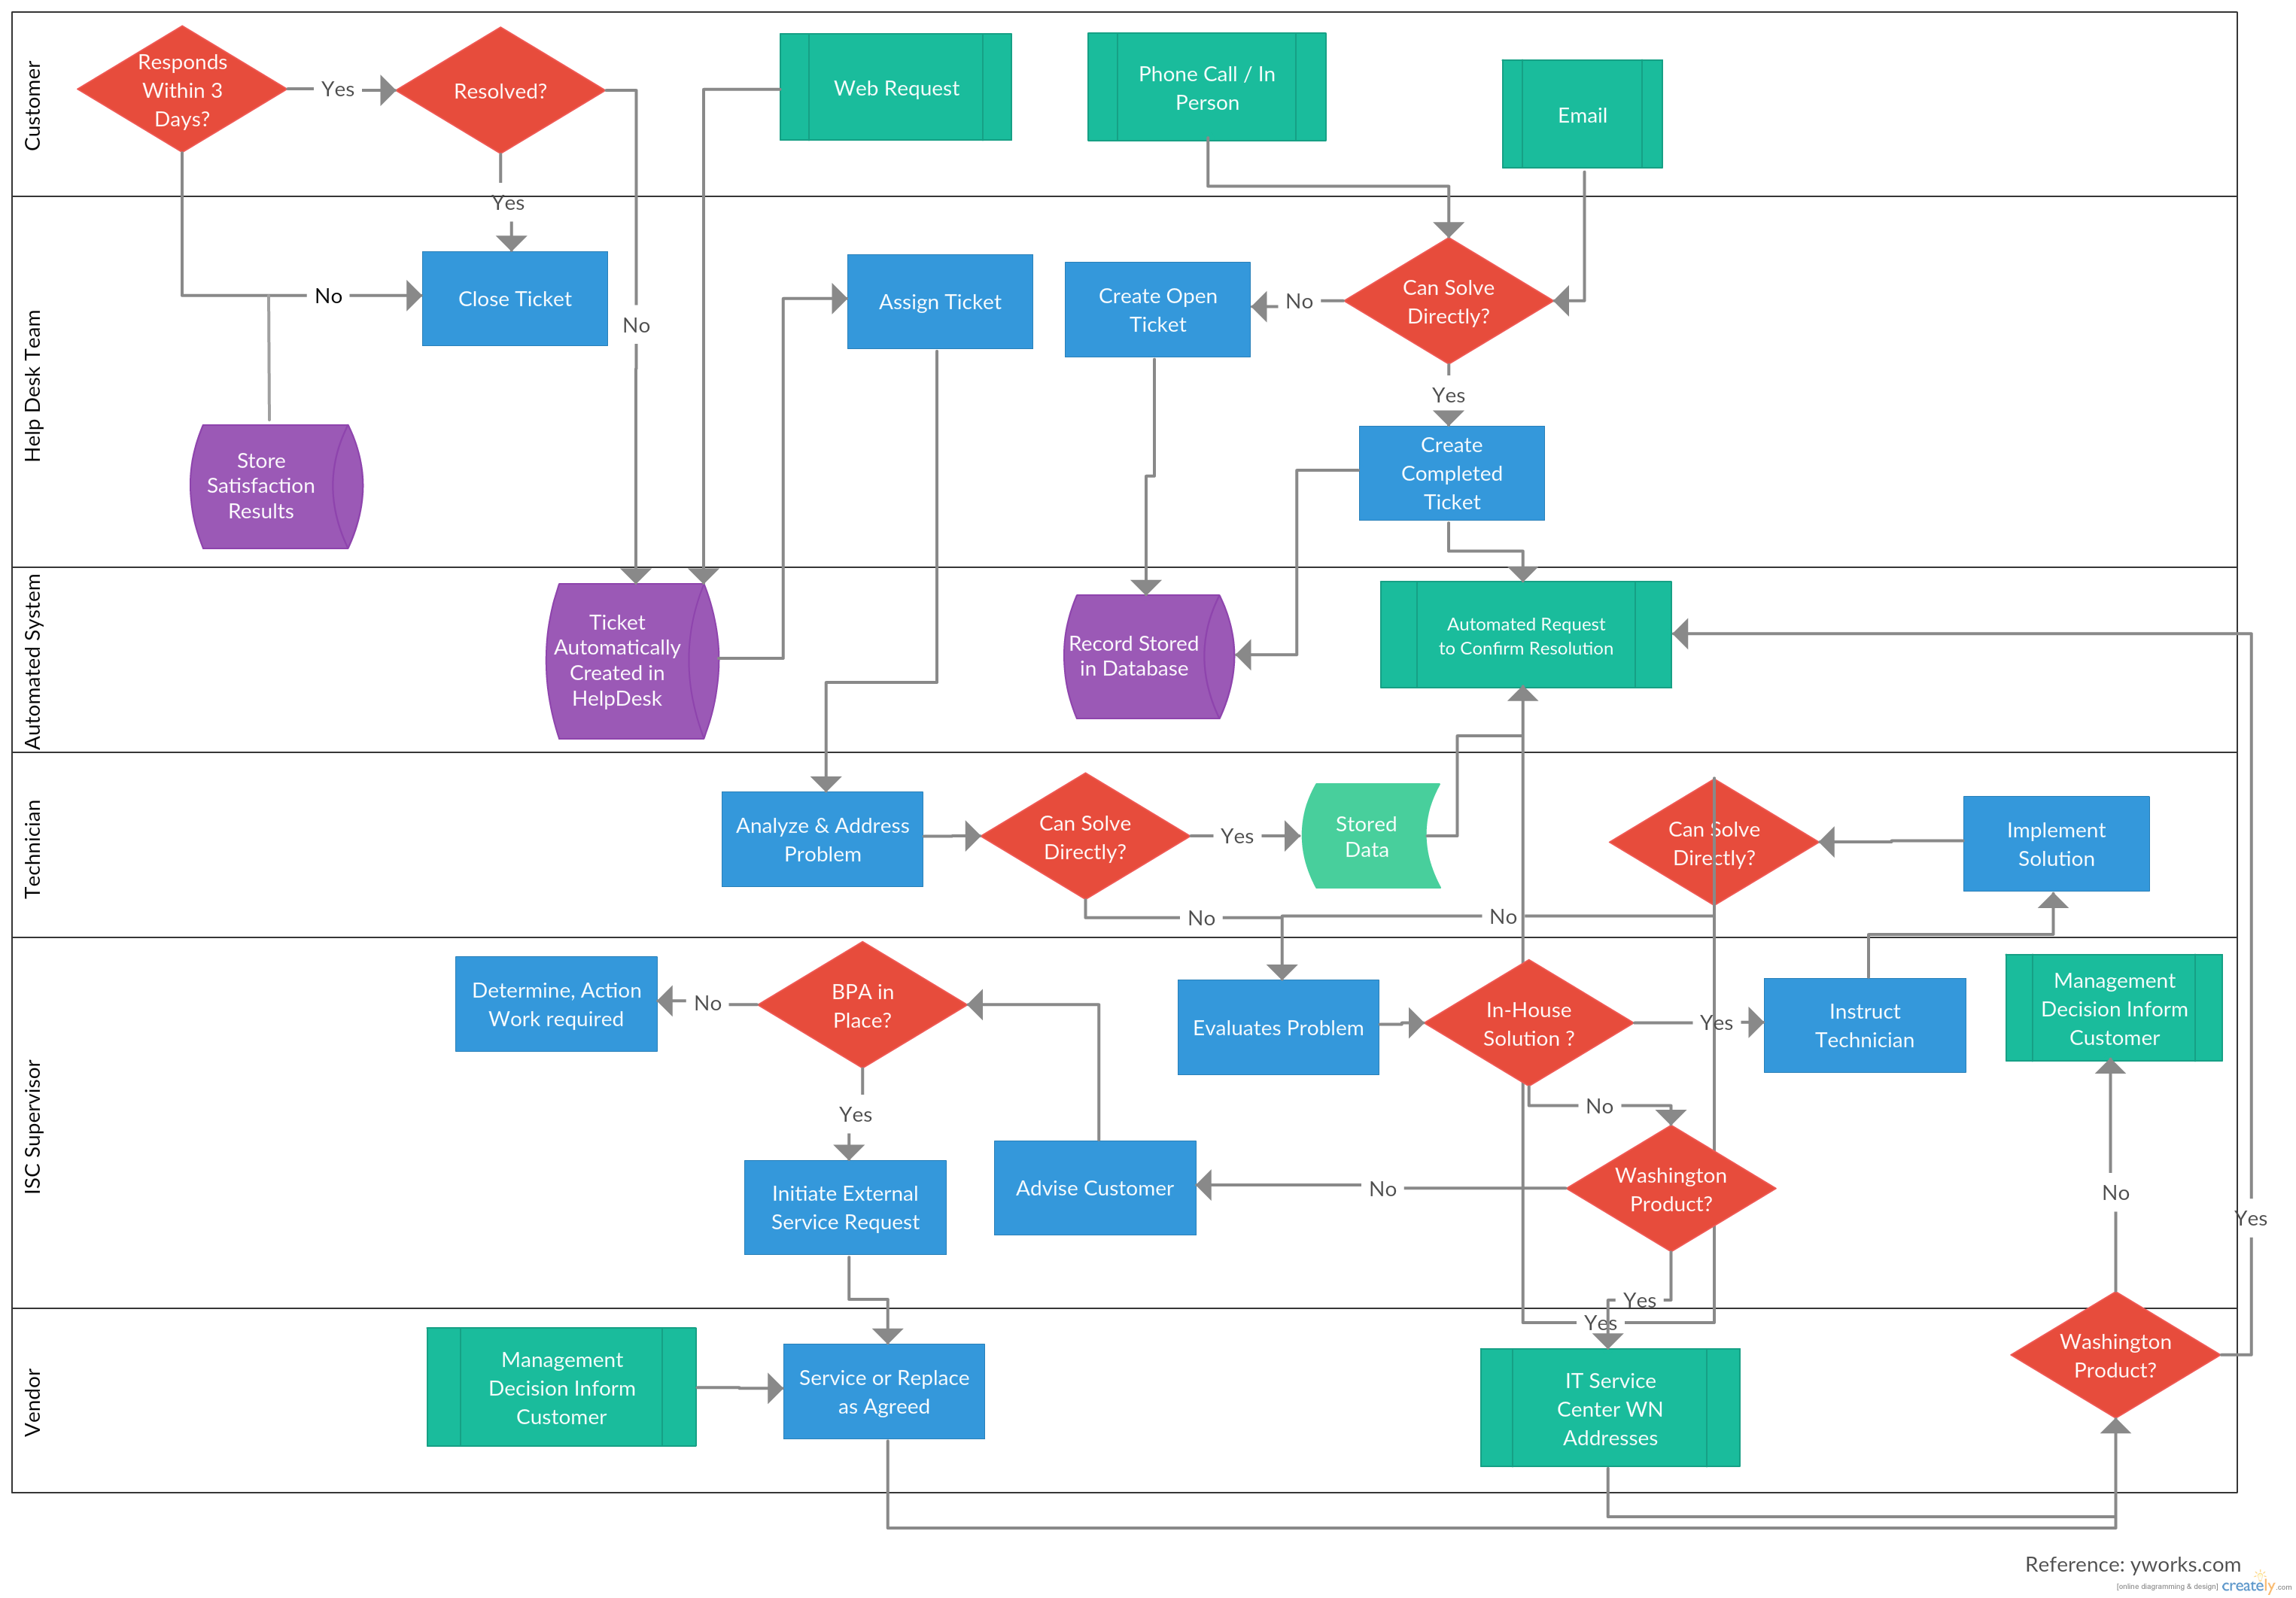 Online Help Desk System Flowchart Example, That Can Be Used